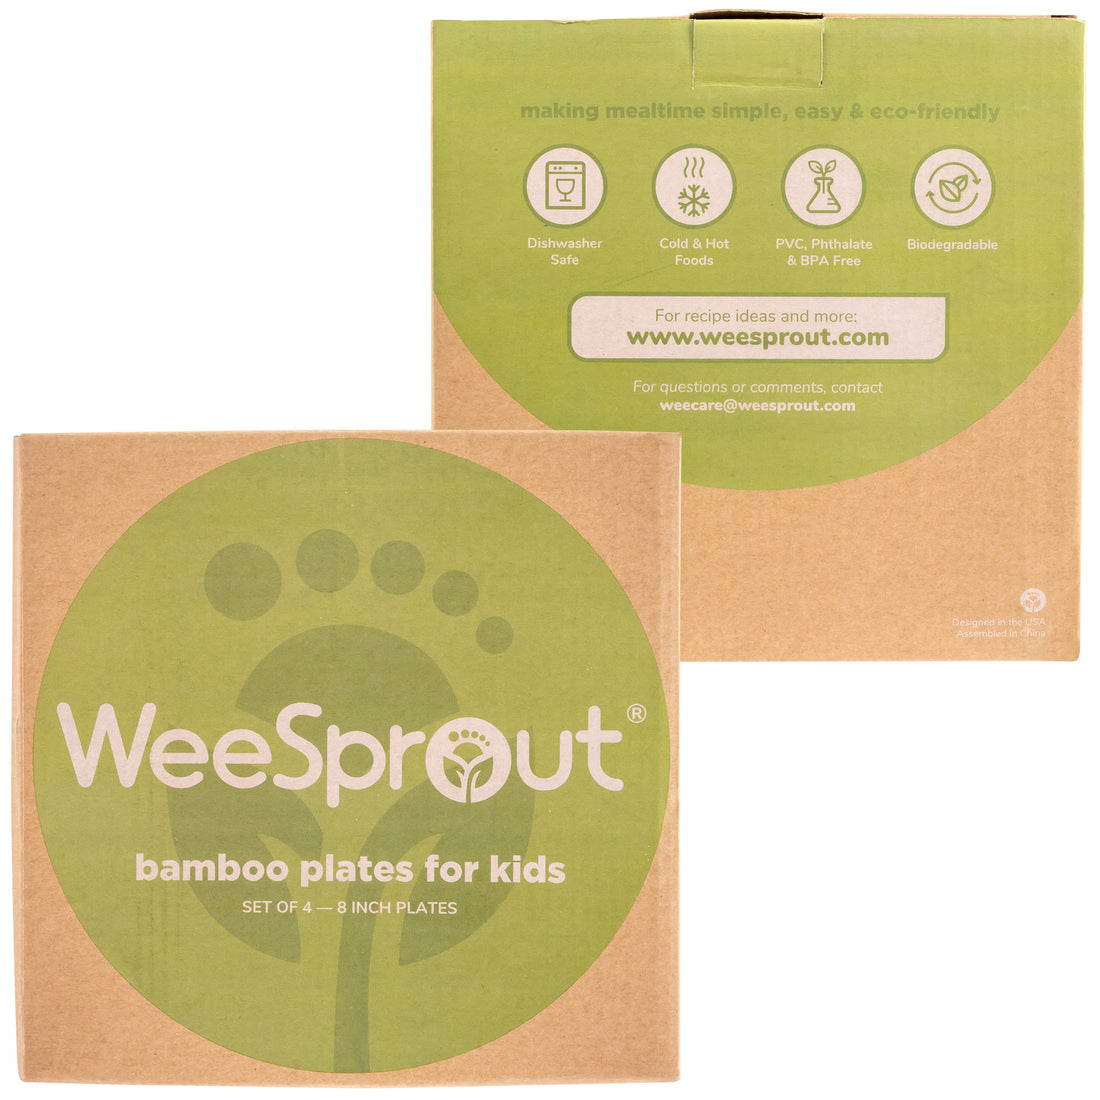 WeeSprout Bamboo Toddler Bowls - 4 PC Set 10 fl oz - The Best Premium Eco Friend